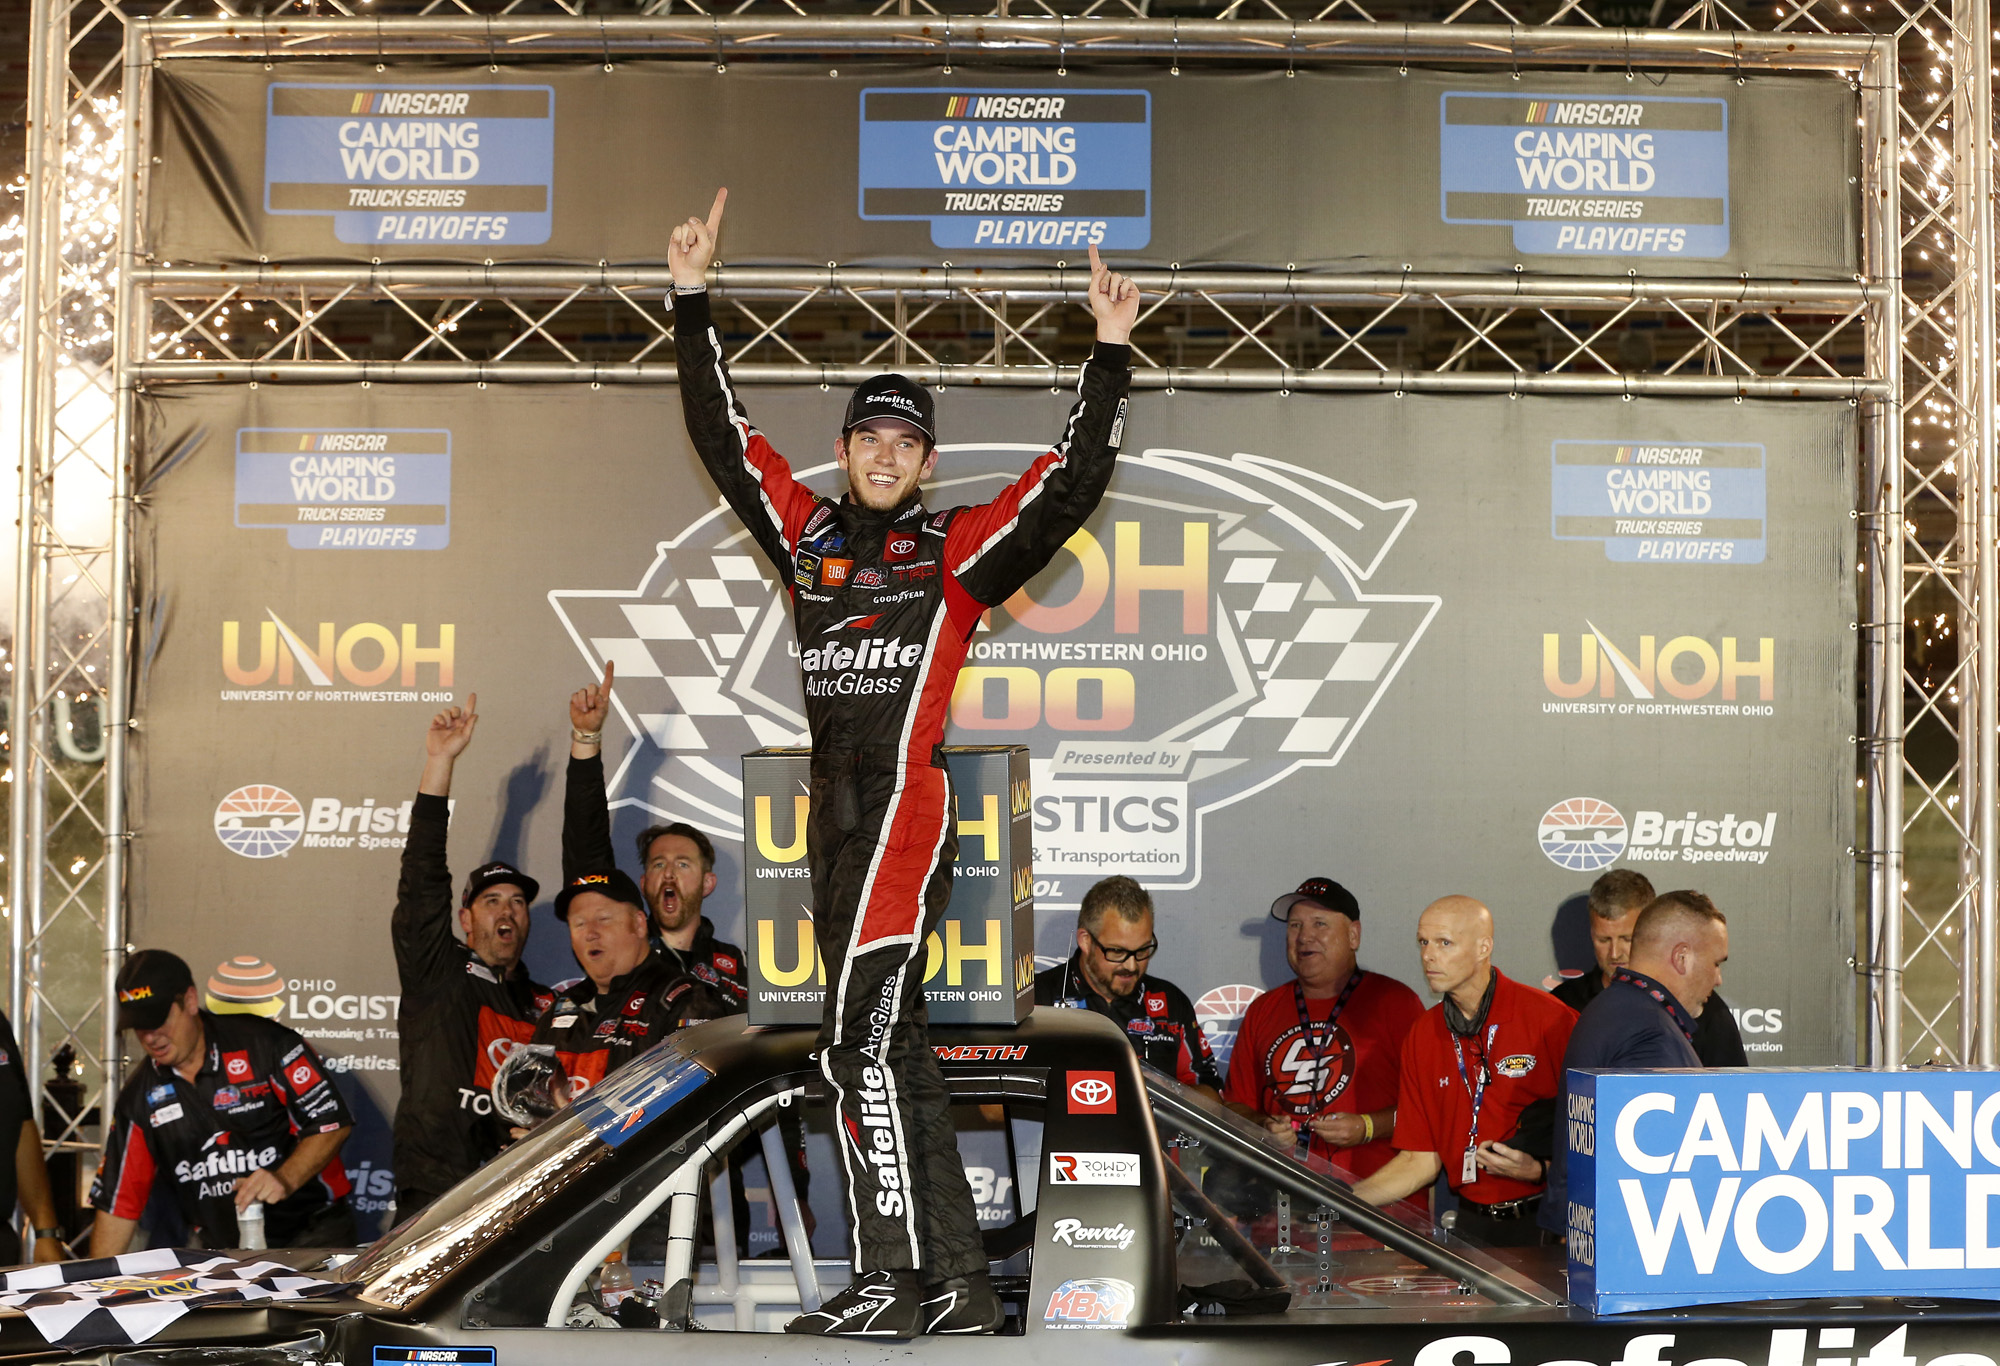 NASCAR Camping World Truck Series UNOH 200 presented by Ohio Logistics